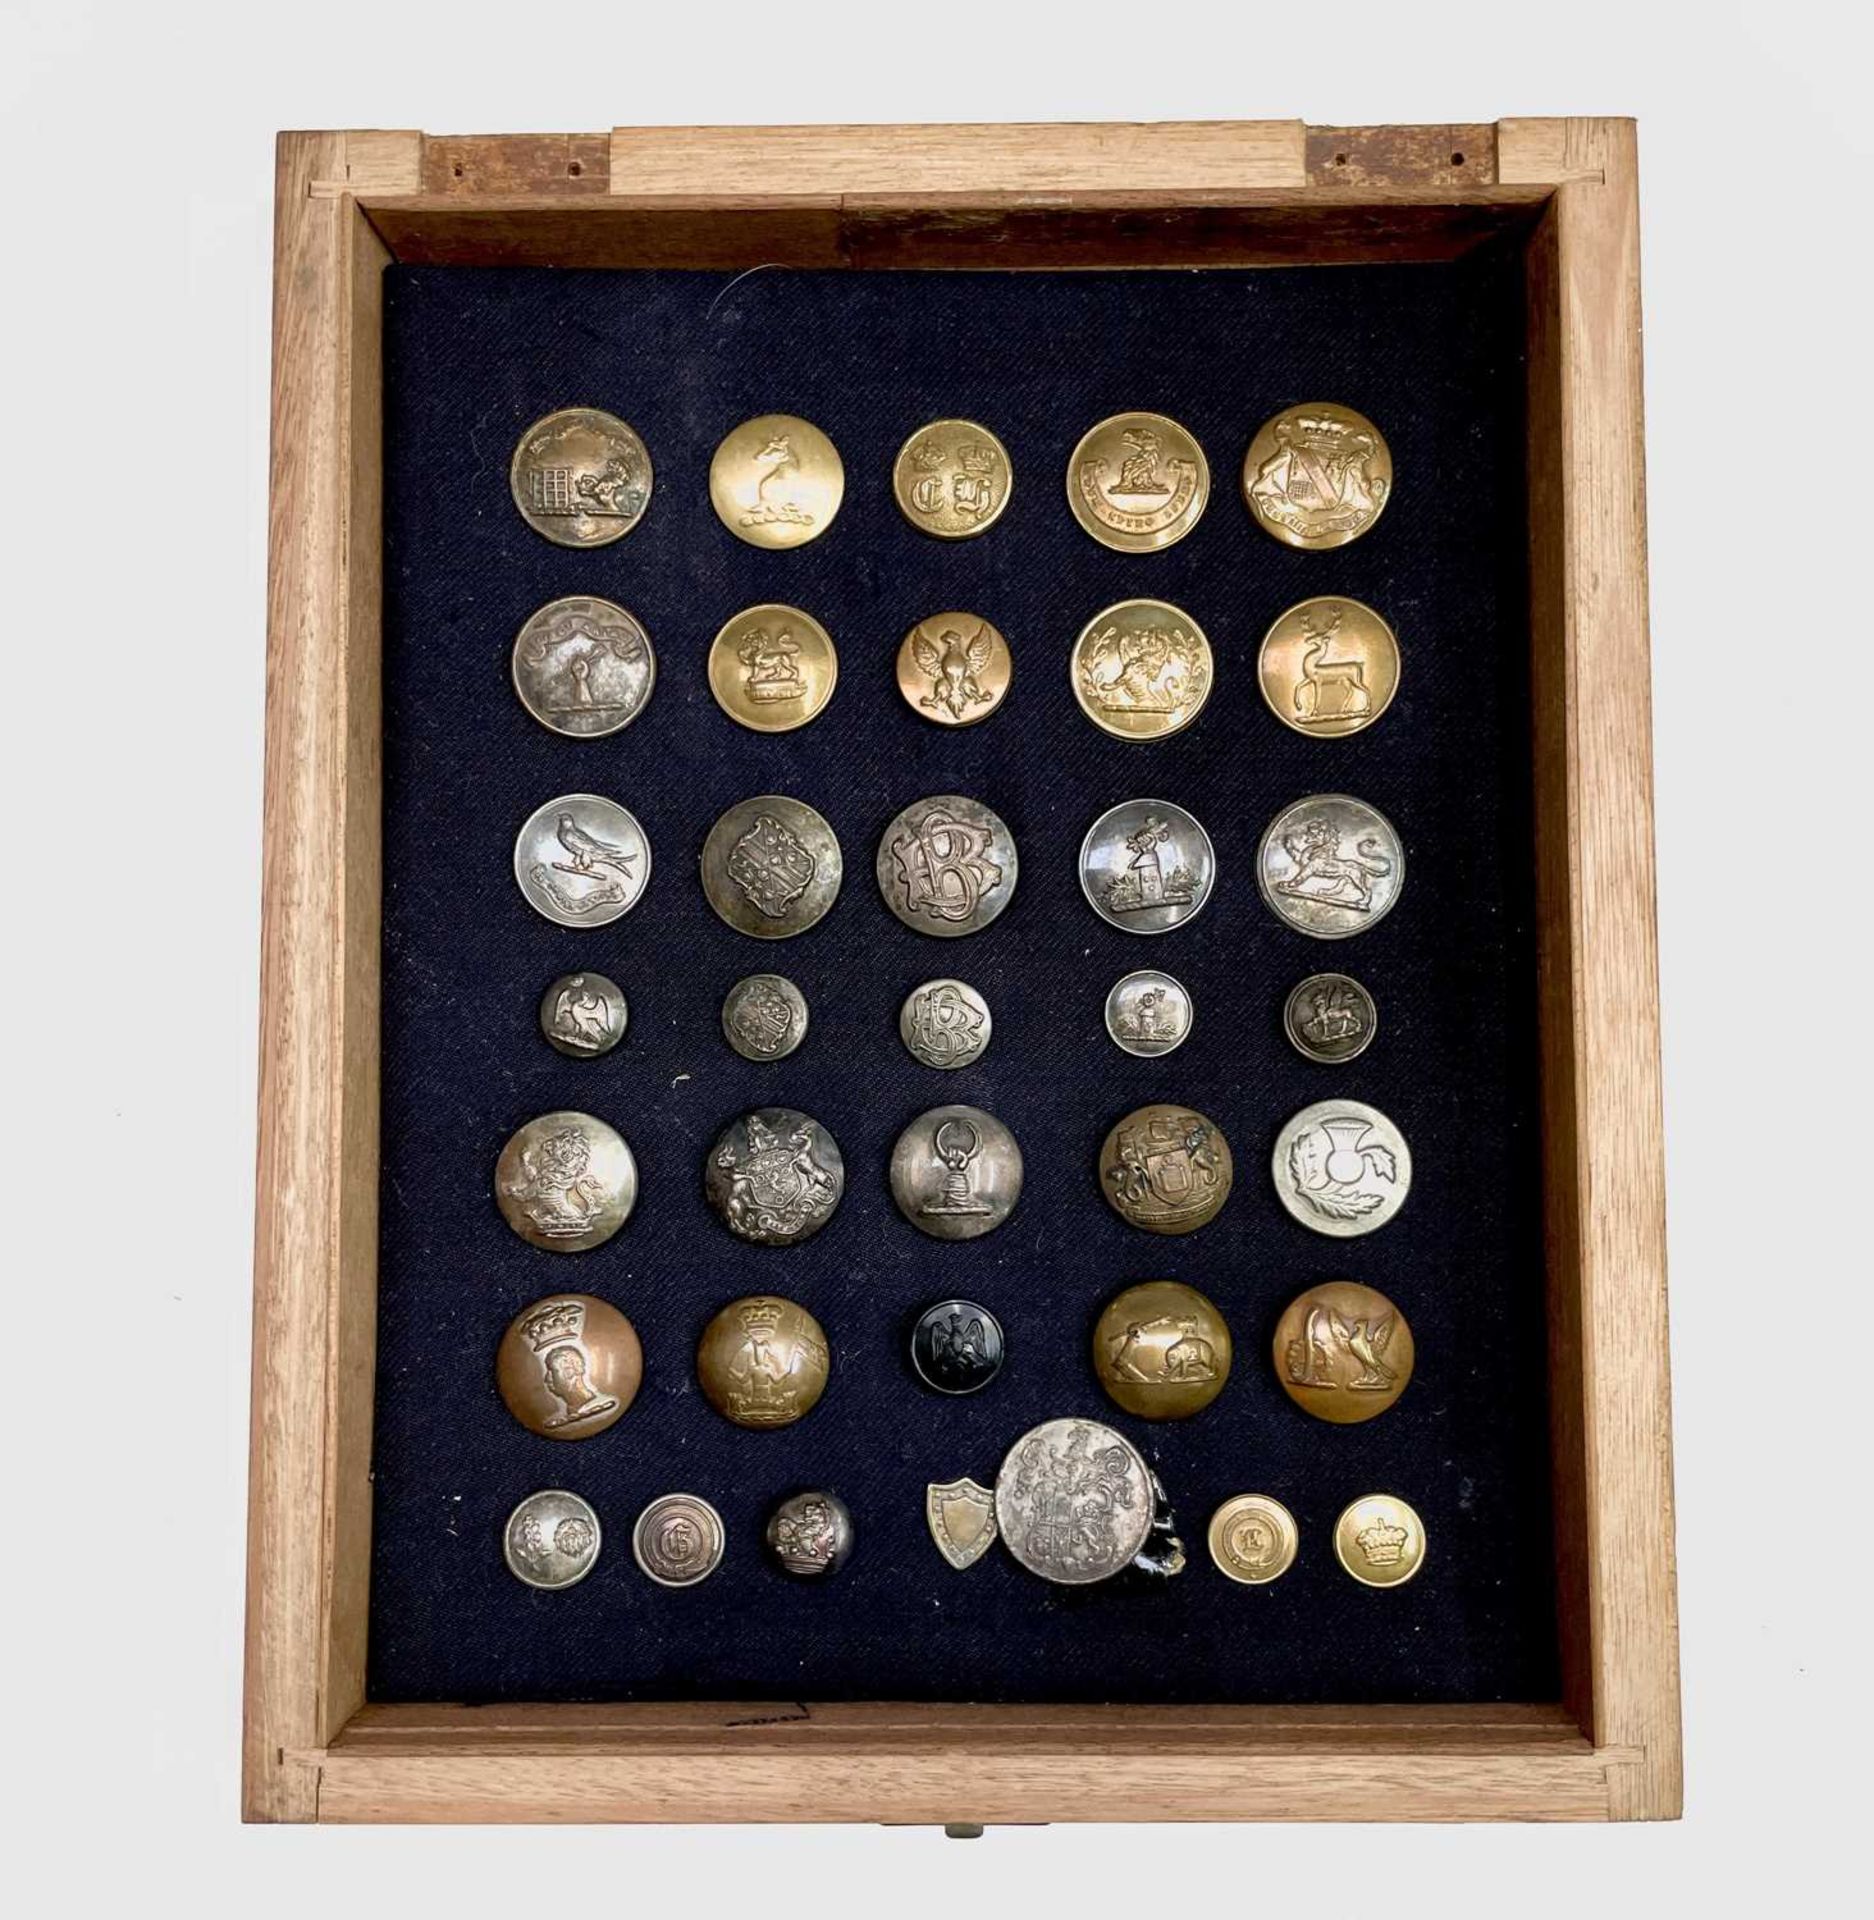 Livery Buttons (x36). Comprising a board mounted framed and glazed display of 36 brass and plated